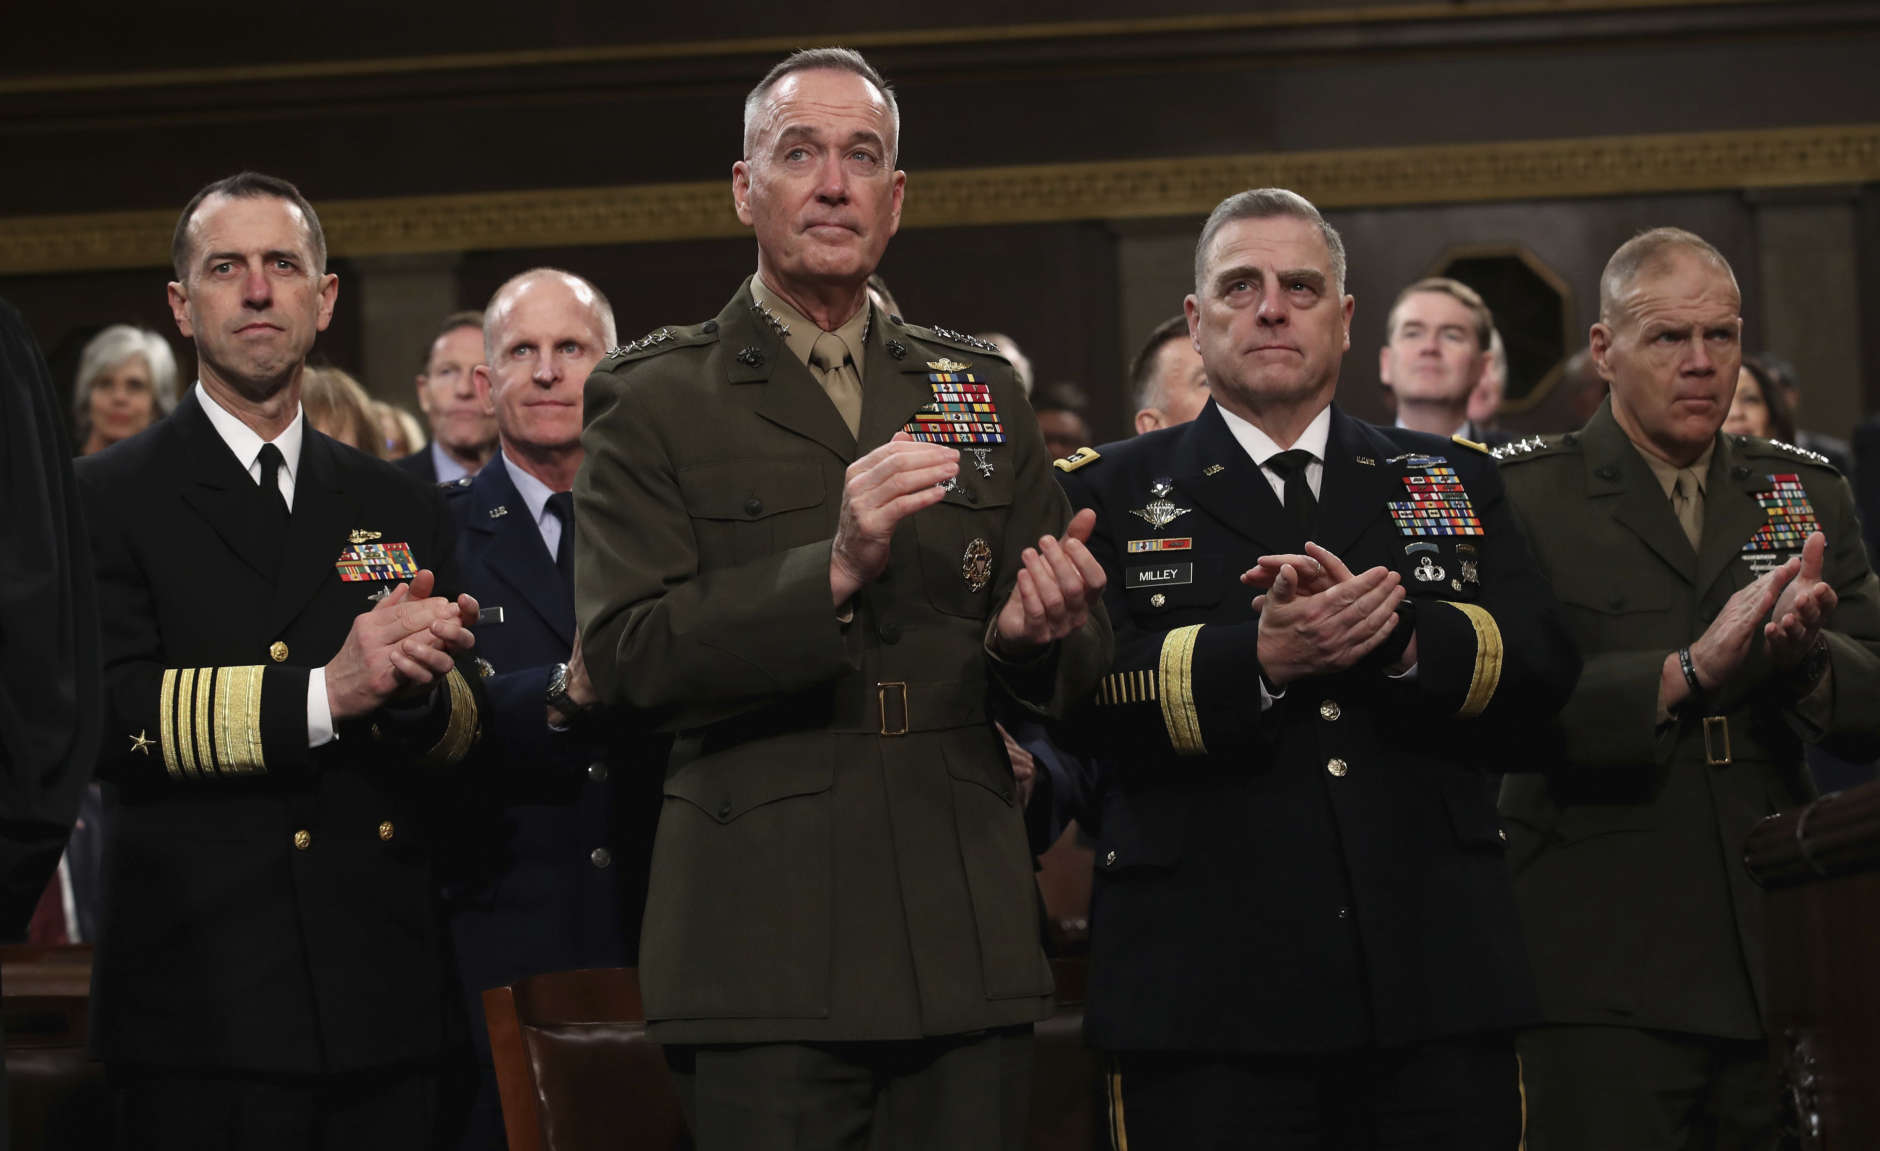 Chief of Naval Operations Adm. John Richardson, from left, Chairman of the Joint Chiefs of Staff Gen. Joseph Dunford, Chief of Staff of the Army Gen. Mark Milley, and Commandant of the Marine Corps Gen. Robert Neller listen as President Donald Trump delivers his first State of the Union address in the House chamber of the U.S. Capitol to a joint session of Congress Tuesday, Jan. 30, 2018 in Washington. (Win McNamee/Pool via AP)